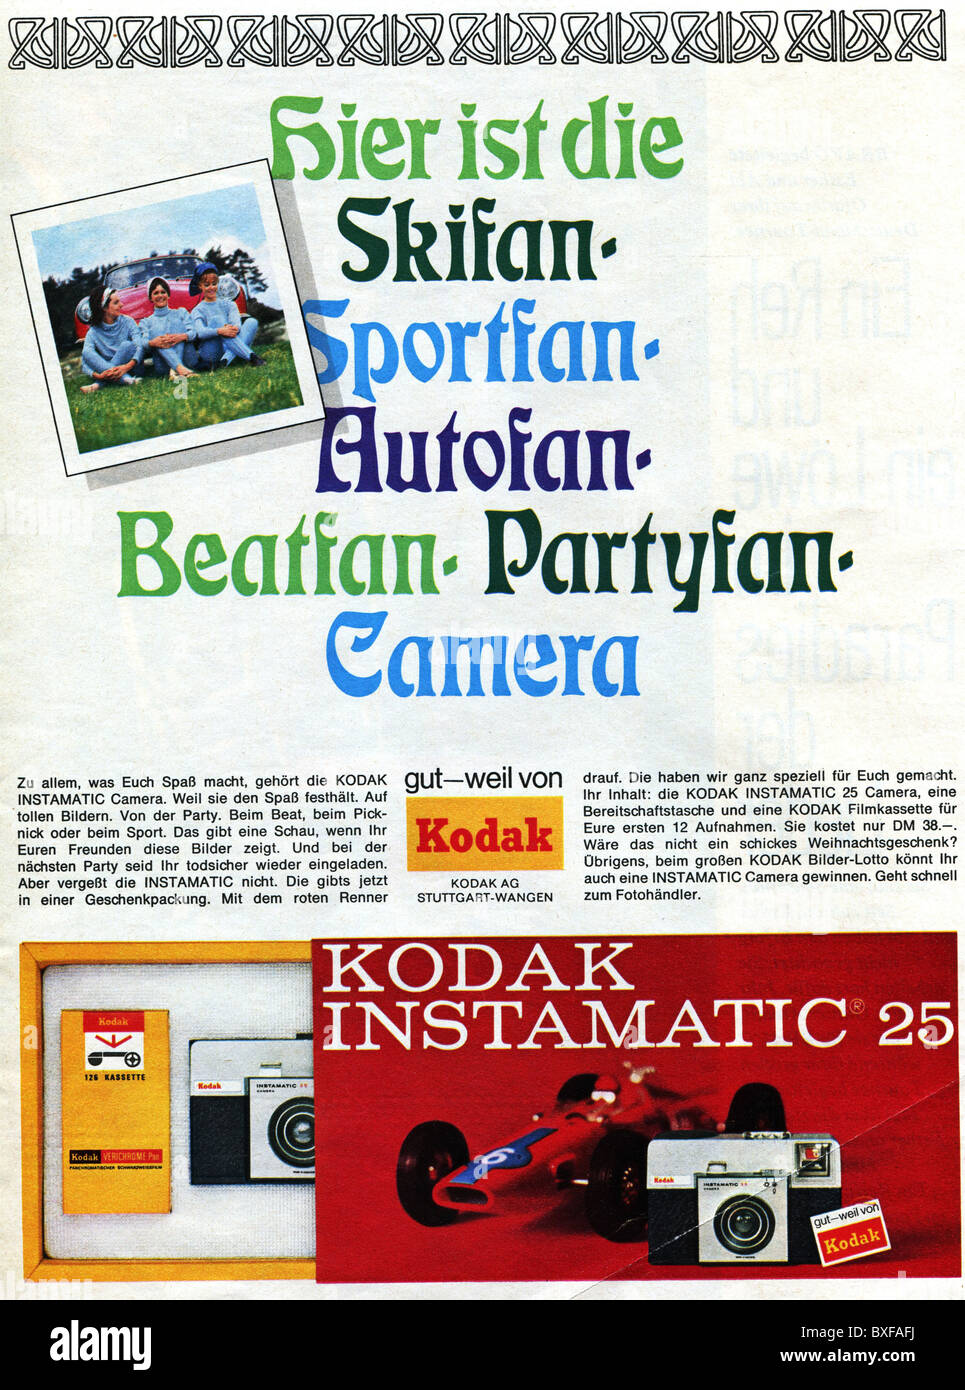 advertising, photography, advert for camera Kodak Instamatic 25, from the magazine 'Bravo', No. 50, 4.12.1967, Germany, Additional-Rights-Clearences-Not Available Stock Photo